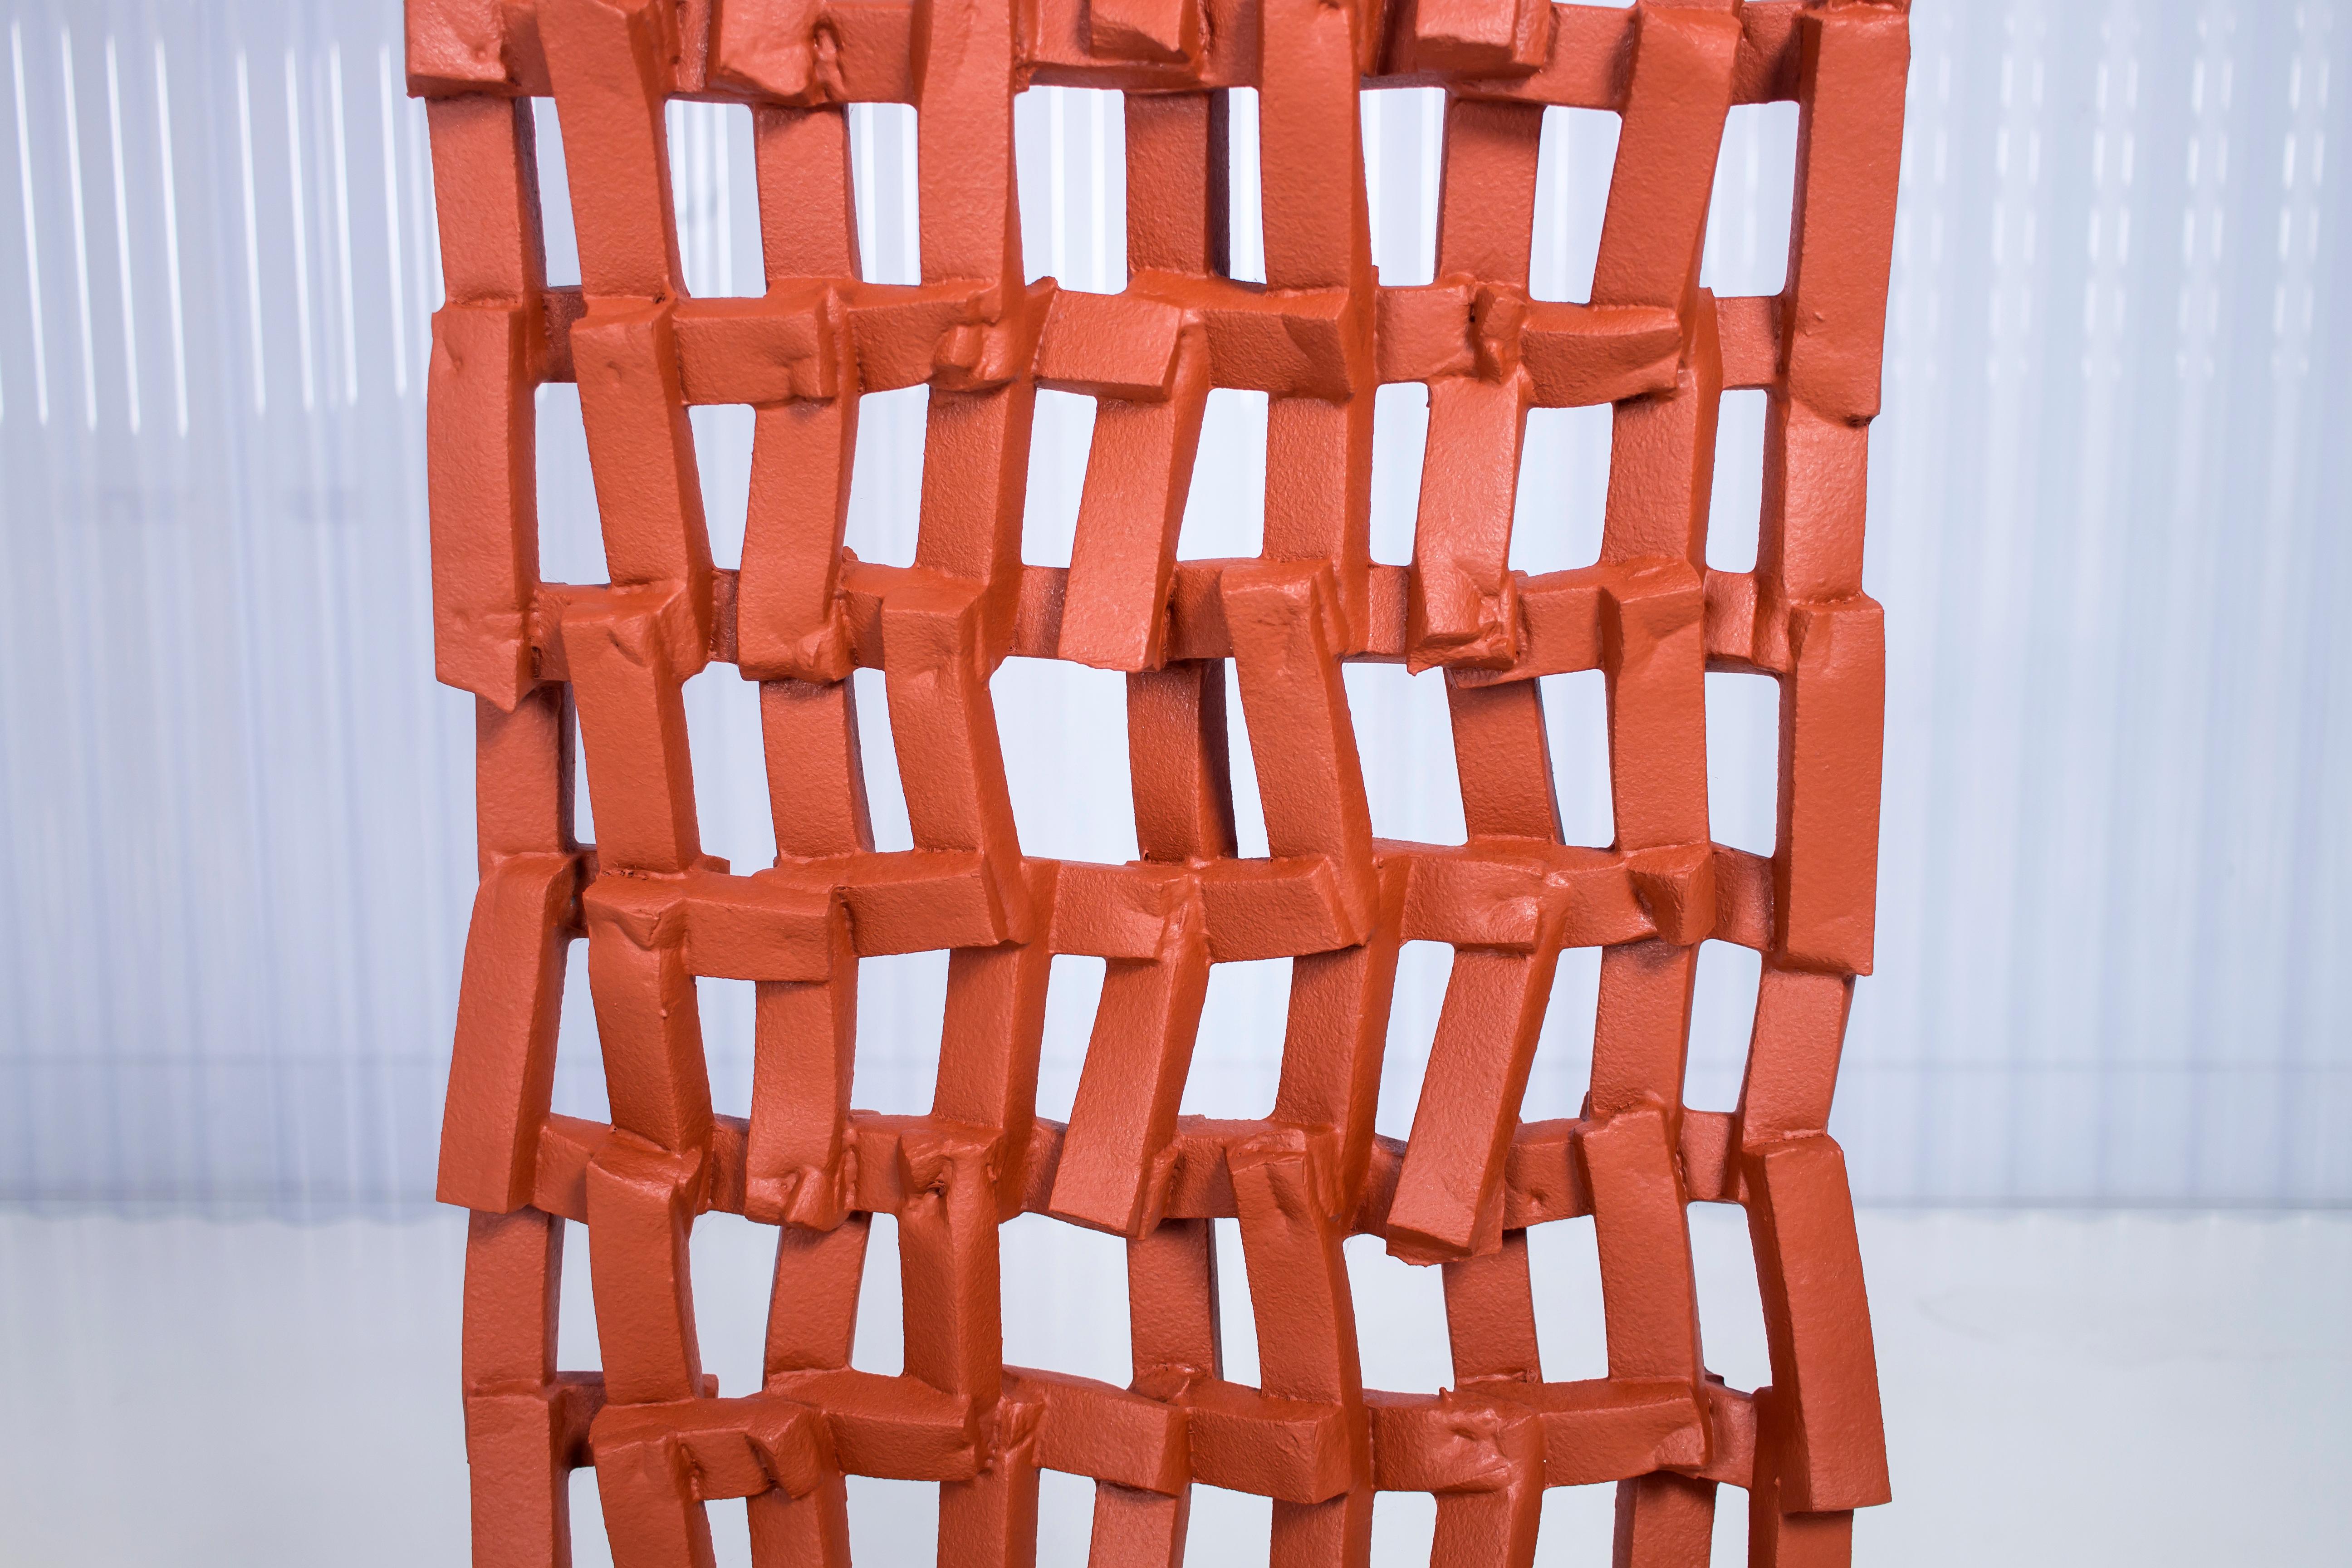 Foam Fences_S_Room Divider is Presented by Anton Hendrik Denys

The Foam Fences_S_Room divider is a narrow foam-coated screen with a closed-off pattern. It can be installed vertically or horizontal and comes with a set of metal hooks, offering an